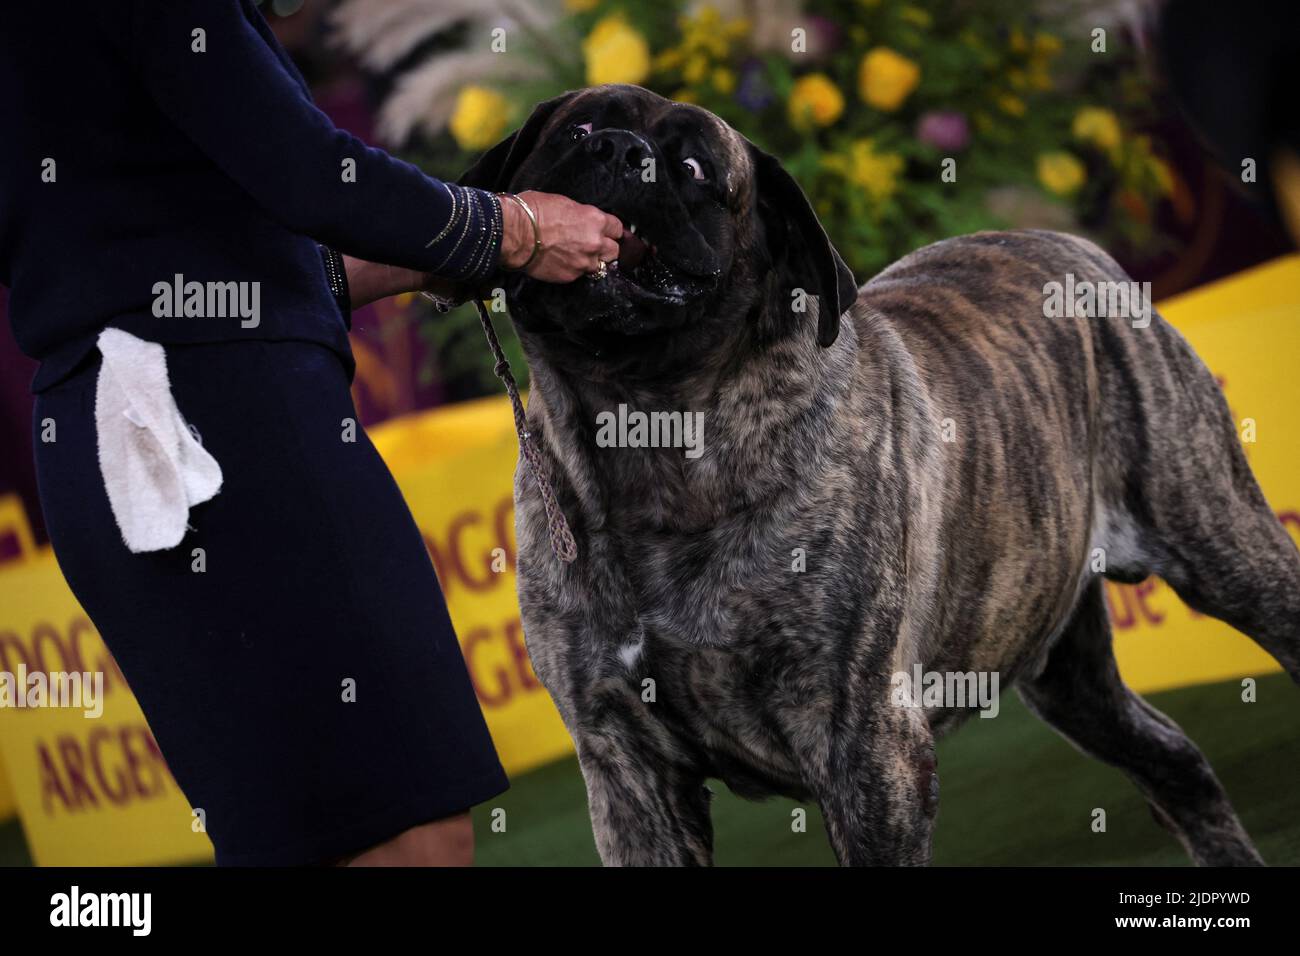 A handler feeds a treat to a Mastiff dog during judging in the Working Group at the 146th Westminster Kennel Club Dog Show at the Lyndhurst Estate in Tarrytown, New York, U.S., June 22, 2022. REUTERS/Mike Segar Stock Photo